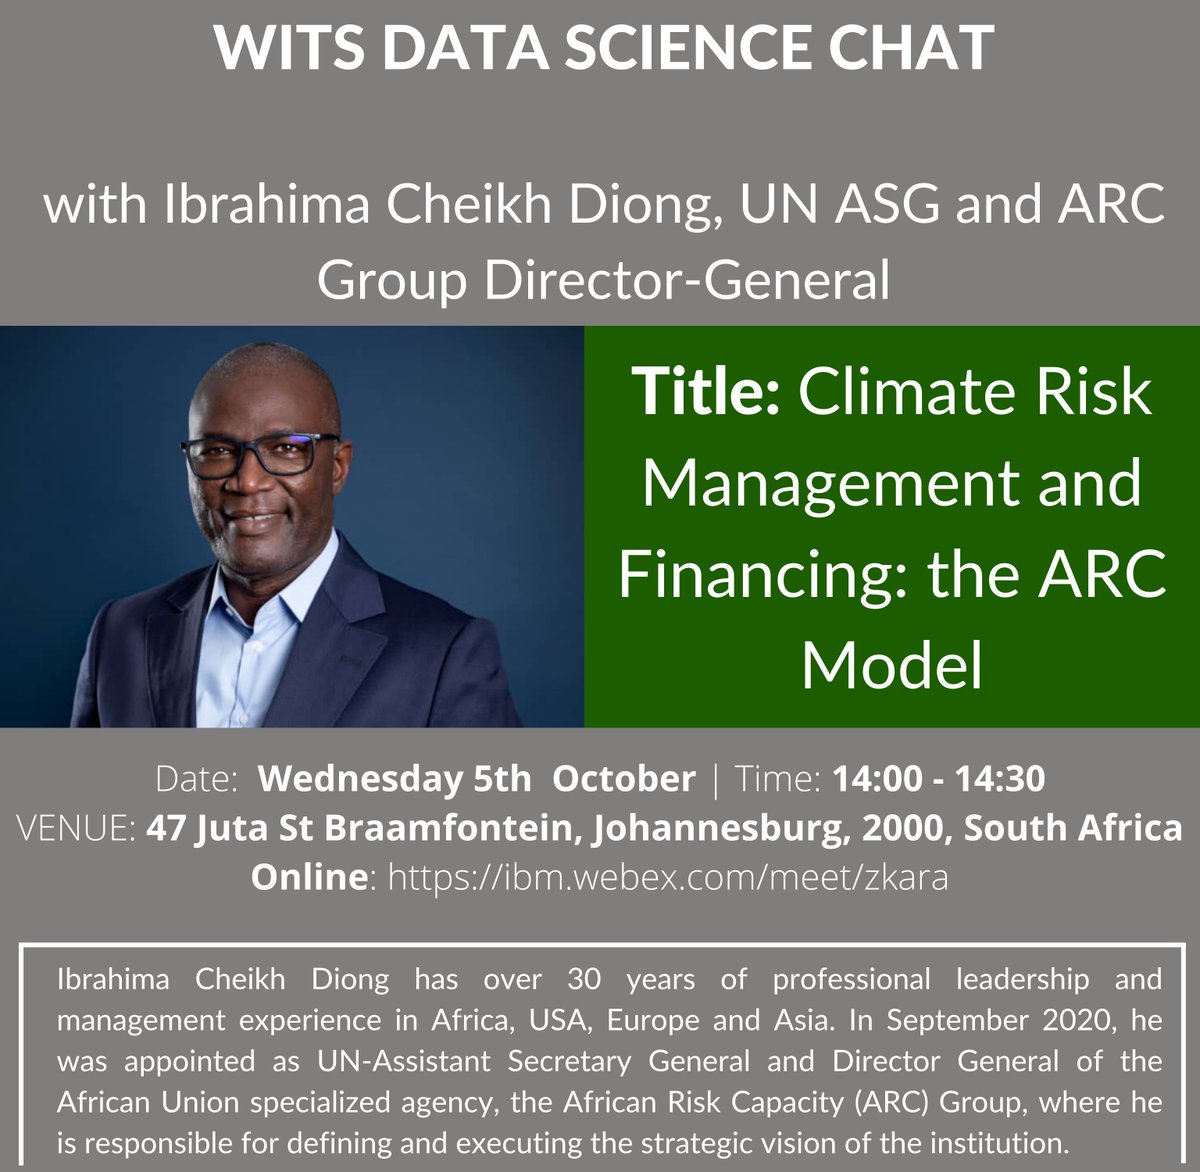 Join us tomorrow at 2pm (GMT + 2) for a lecture at @WitsUniversity on 'Climate Risk Management and Financing: the ARC Model' by UN ASG and ARC Group DG, @icdiong. To connect, please click here ➡️ bit.ly/3UZd09U